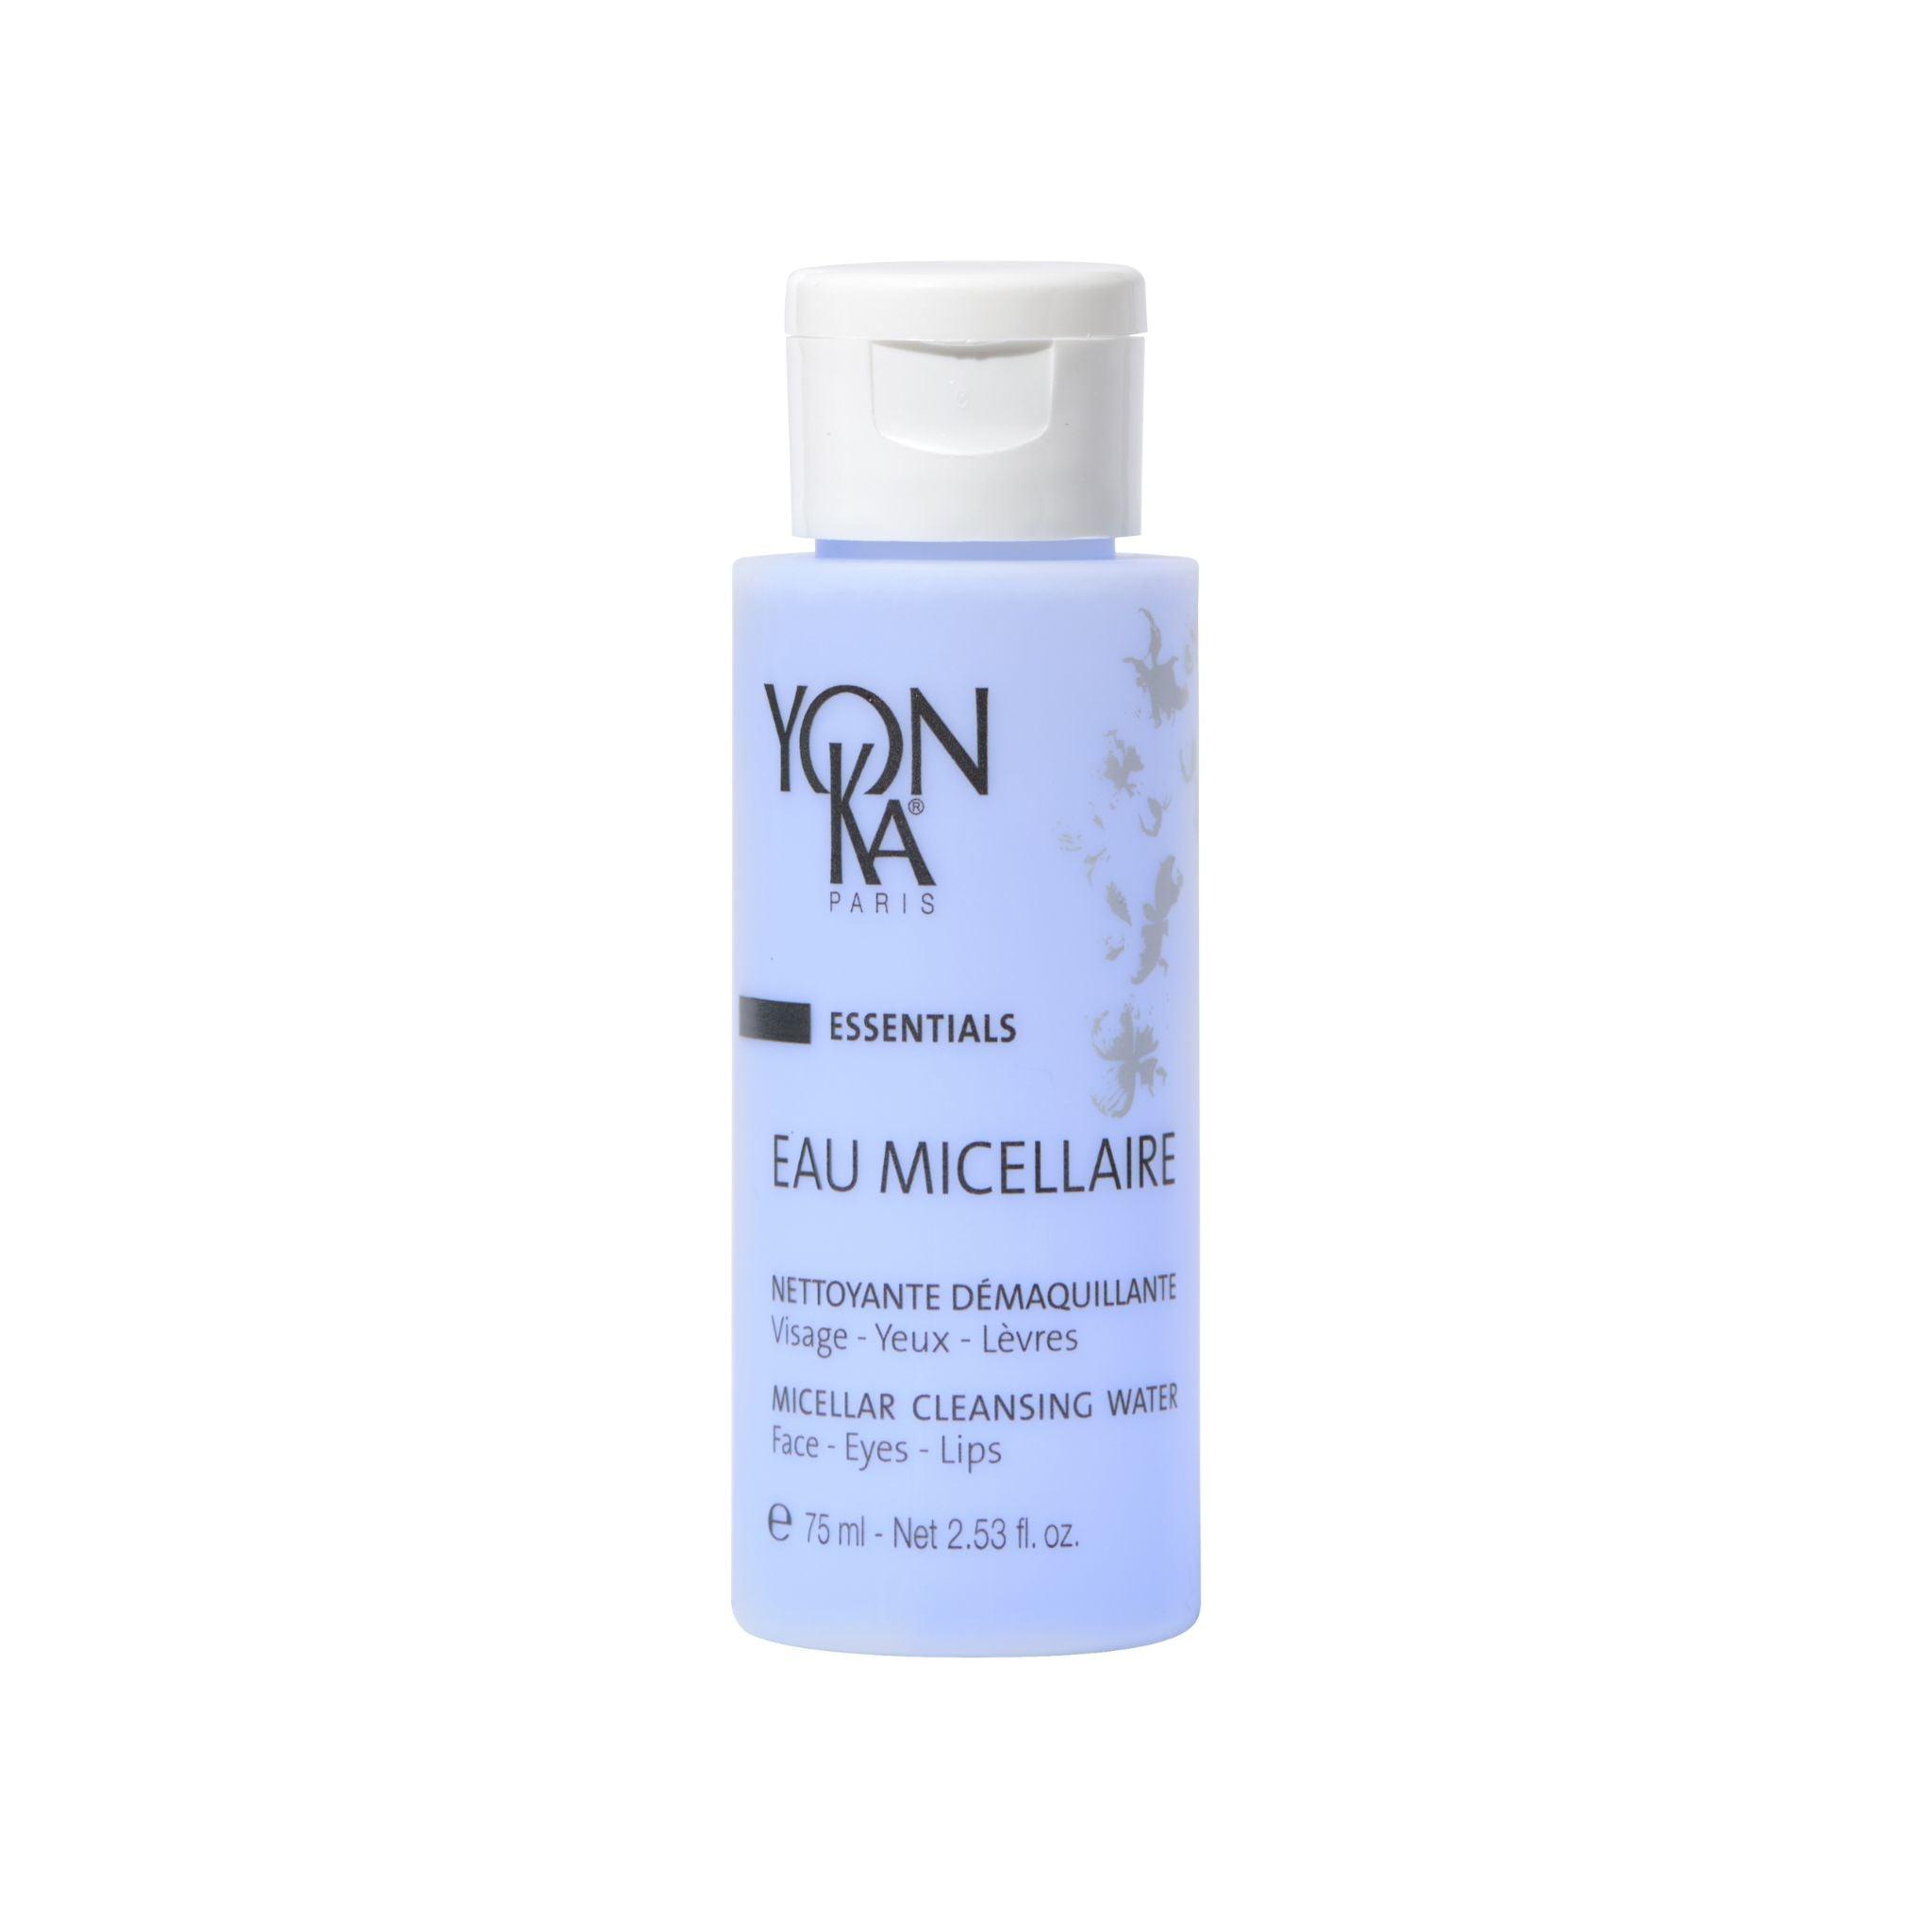 YonKa Eau Micellaire (Micellar Water) - Travel Size - The Beauty House Shop